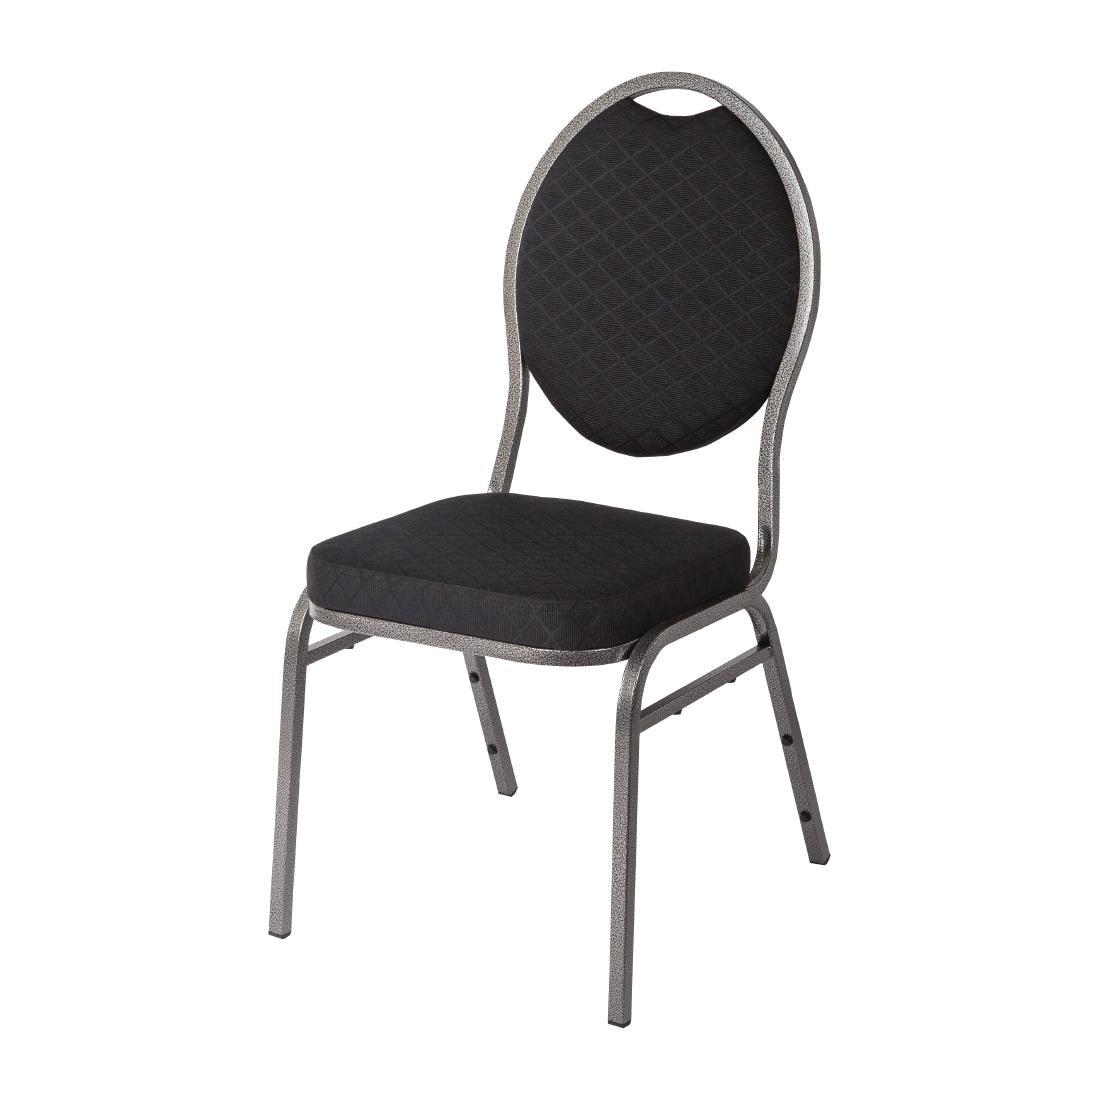 Bolero Oval Back Banquet Chairs Grey & Black (Pack of 4) - CE142  - 2